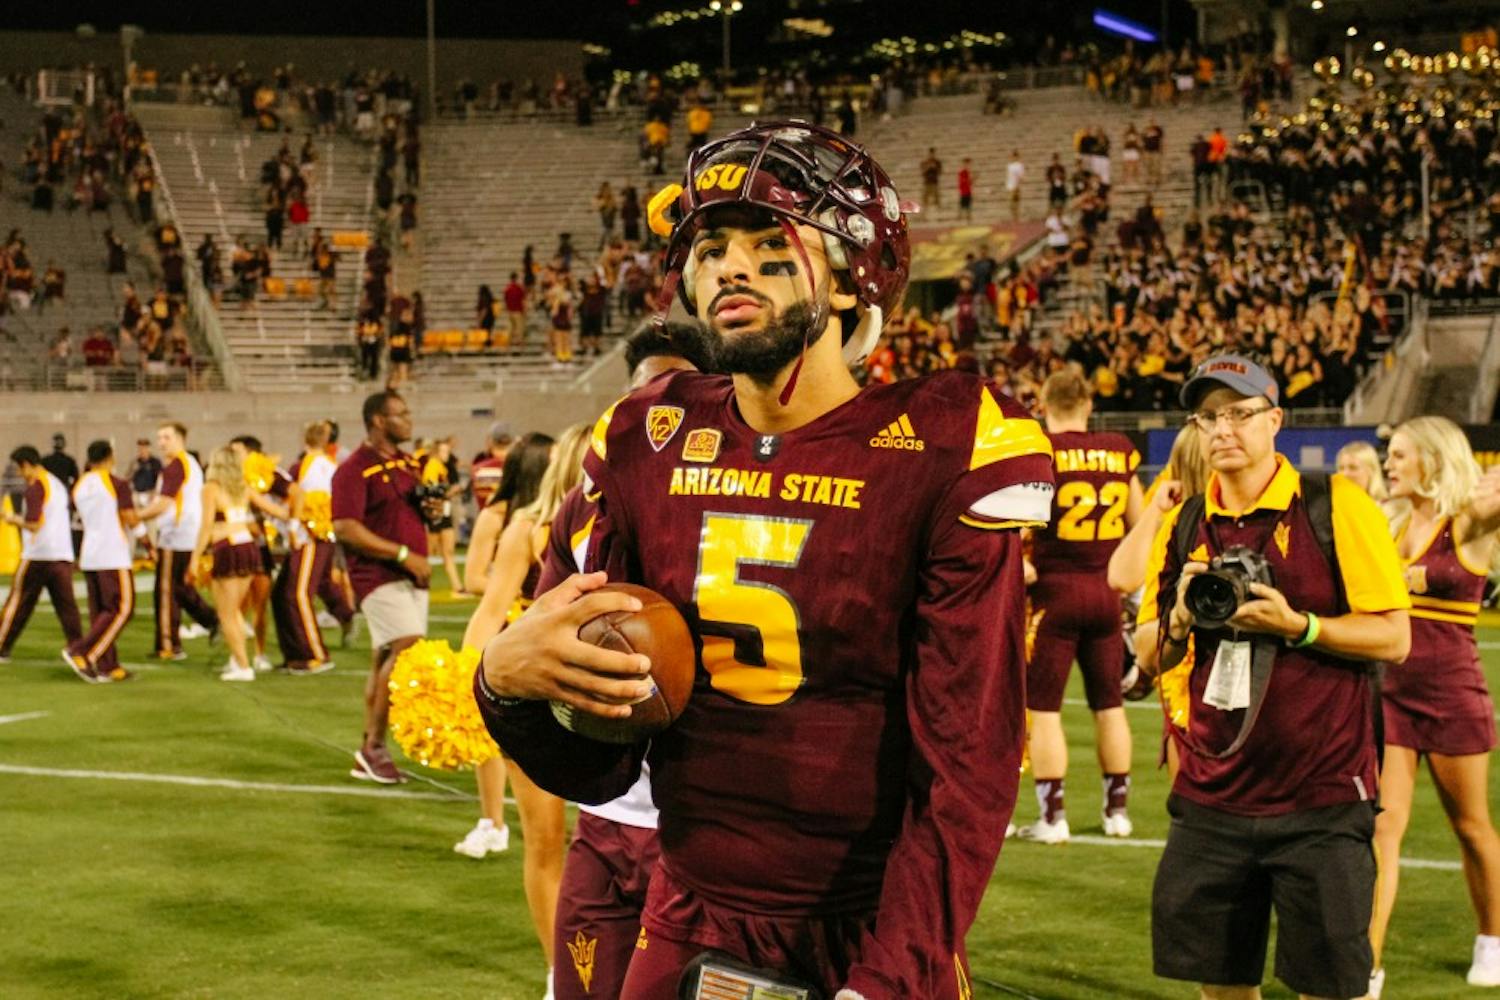 Quarterback Manny Wilkins (5) walks off the field after a football game versus the California Golden Bears in Tempe, Arizona, on Saturday, Sept. 24, 2016.